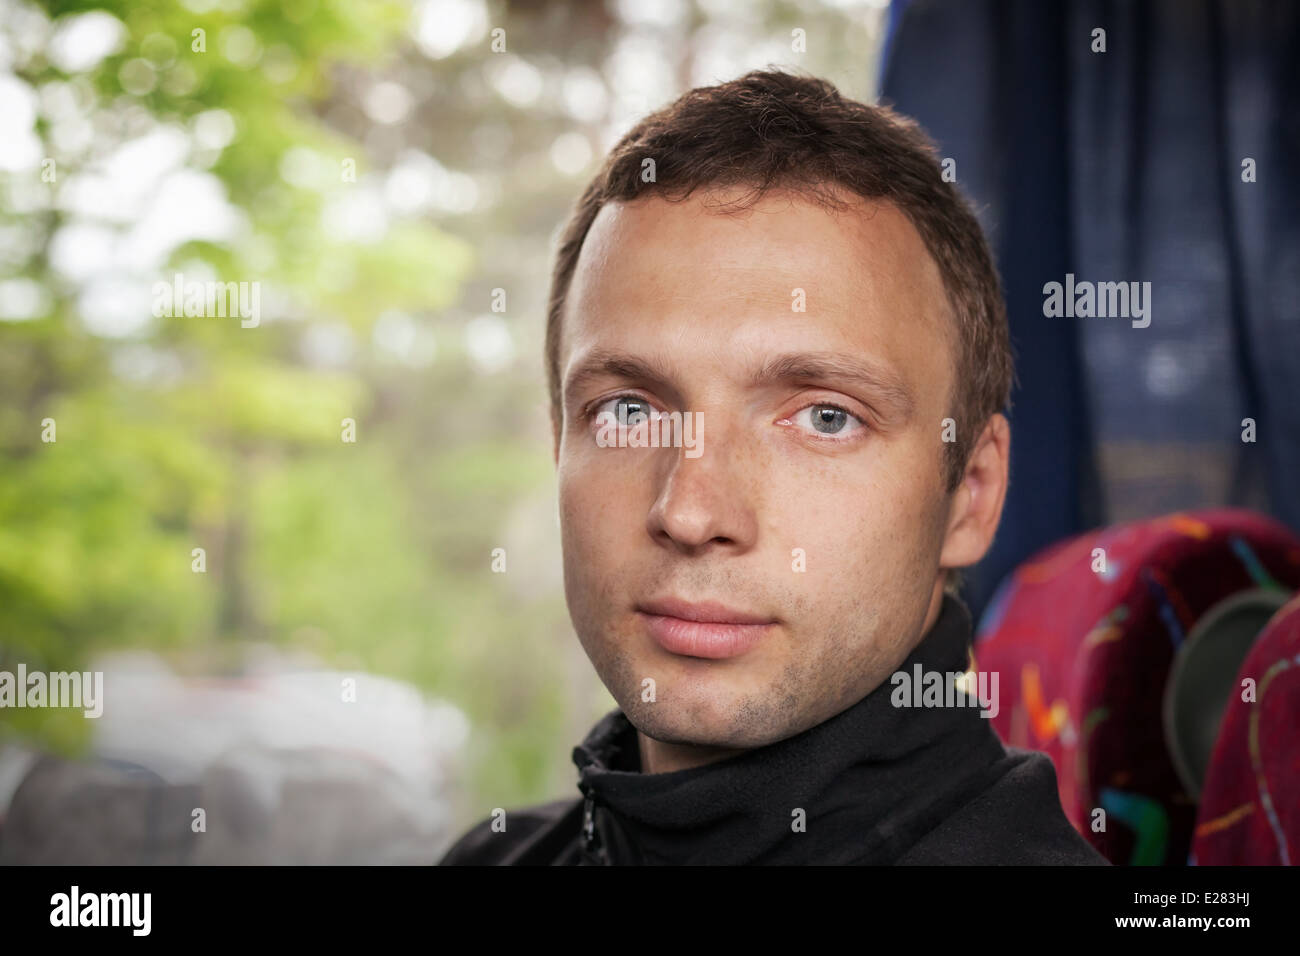 Passenger in the Bus, Portrait of Young Caucasian man Stock Photo